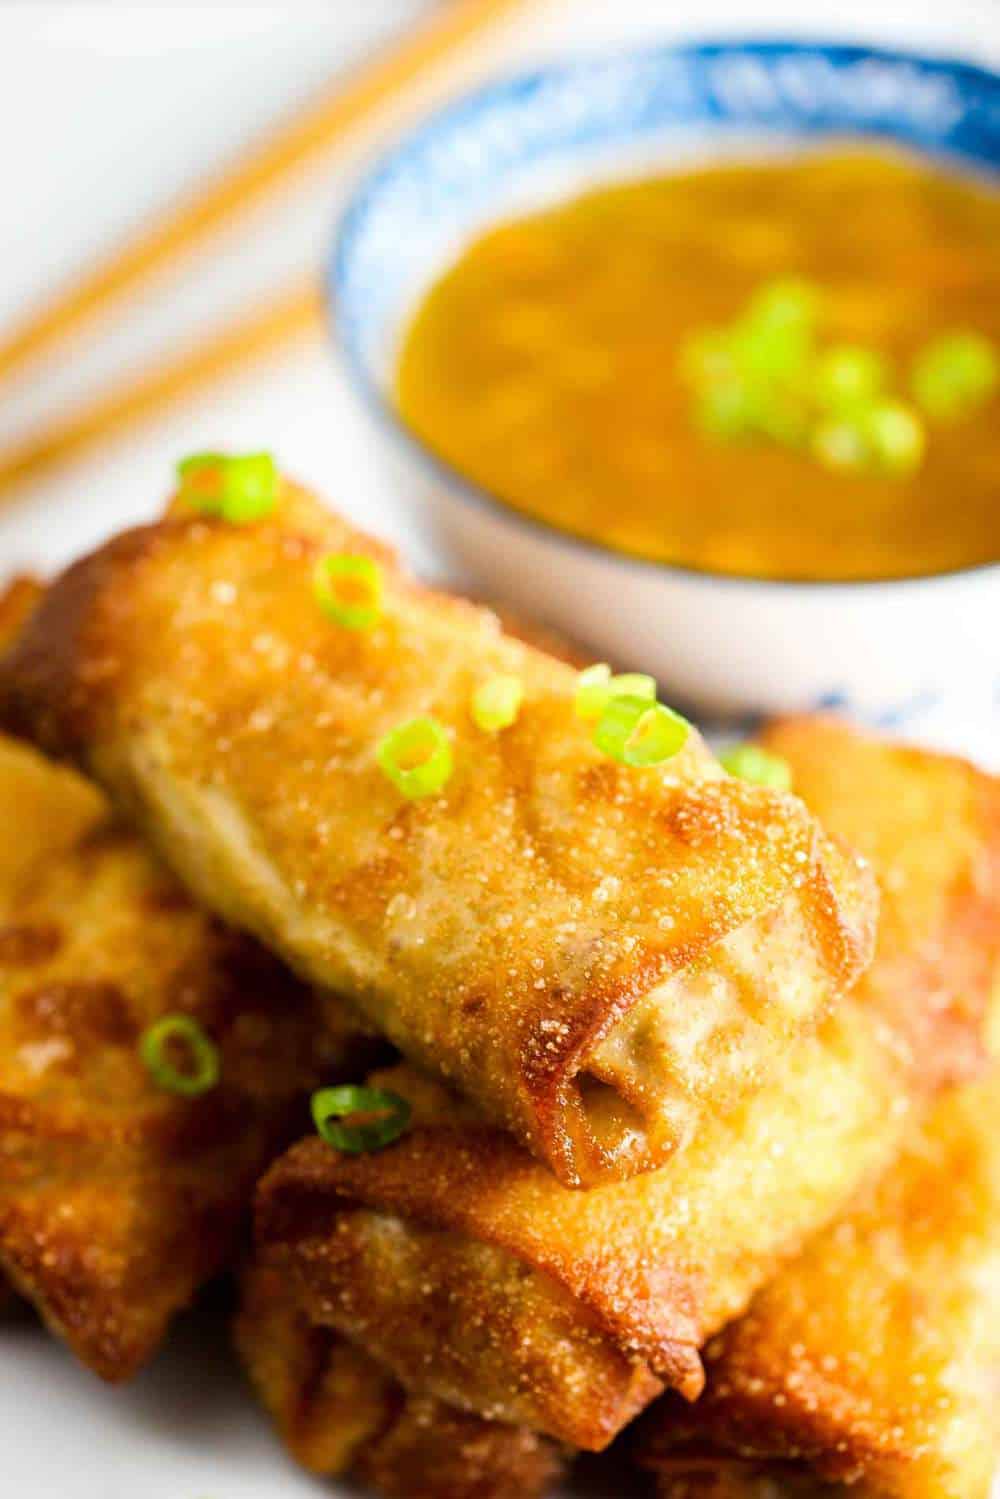 Homemade egg rolls are the perfect appetizer for a party